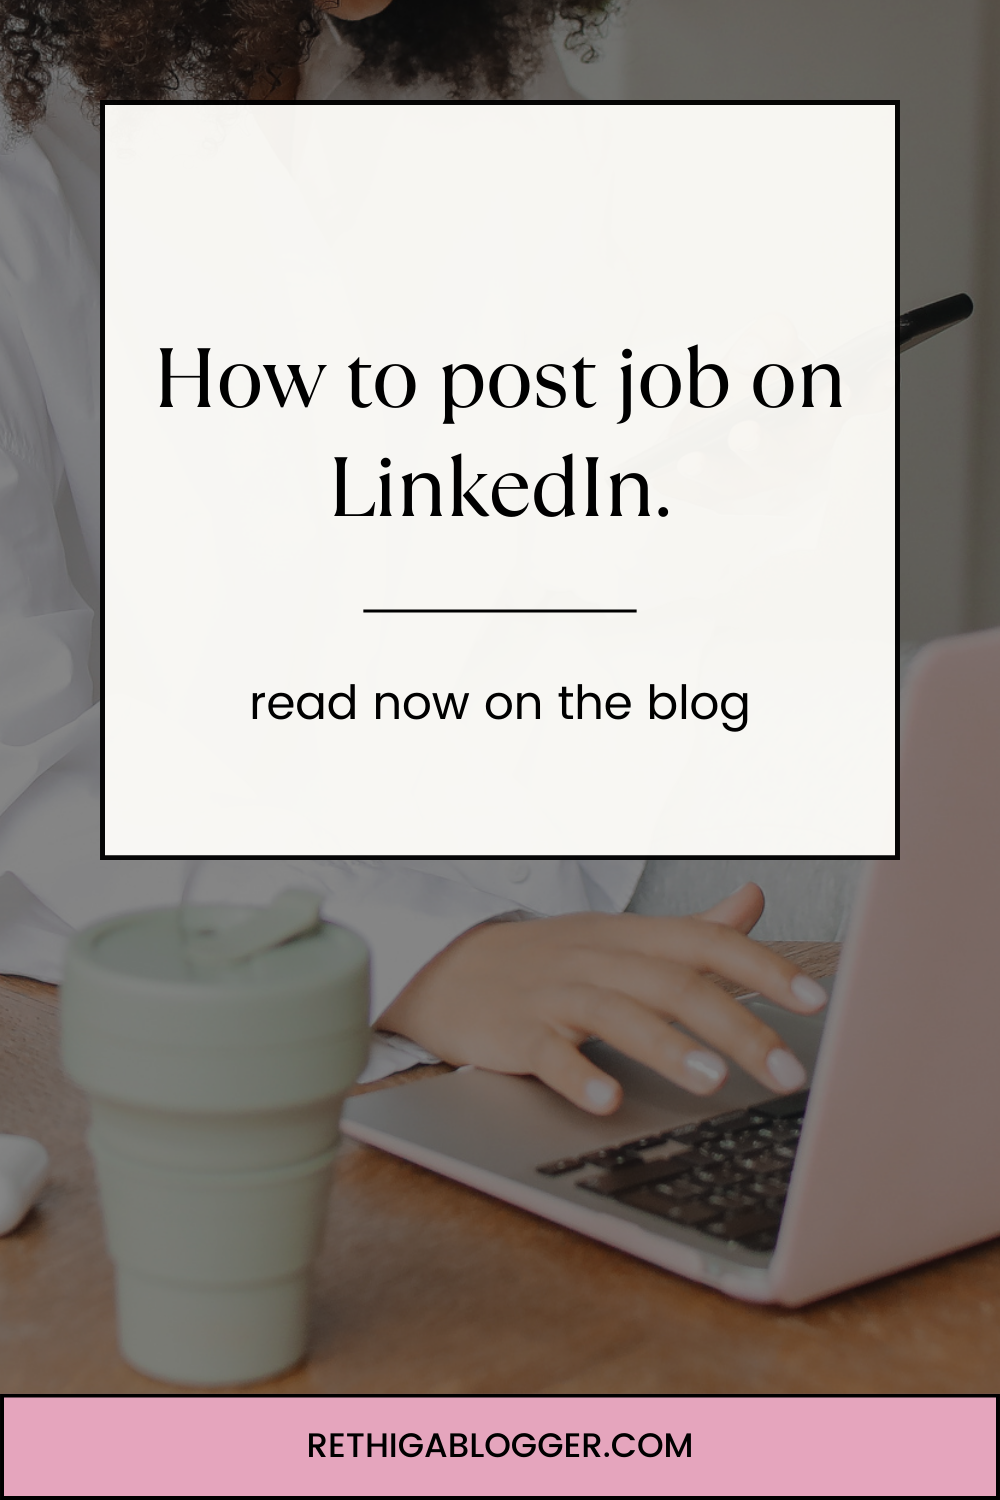 how to post a job on LinkedIn, effectively share your LinkedIn profile, and reach out to recruiters